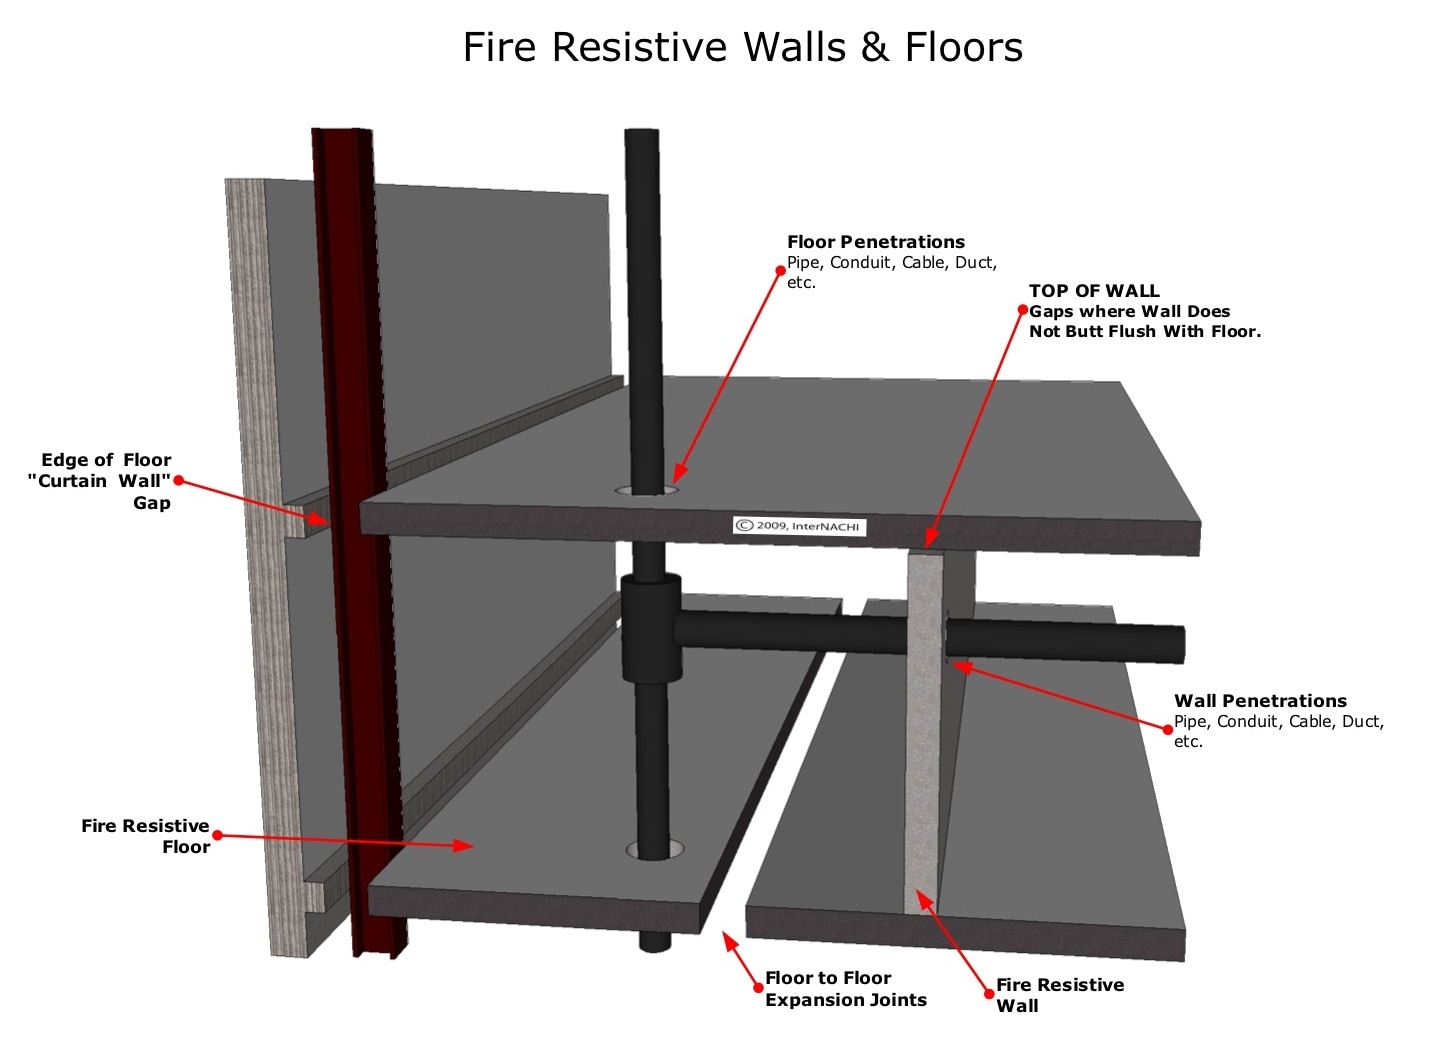 Fire resistive walls and floors.